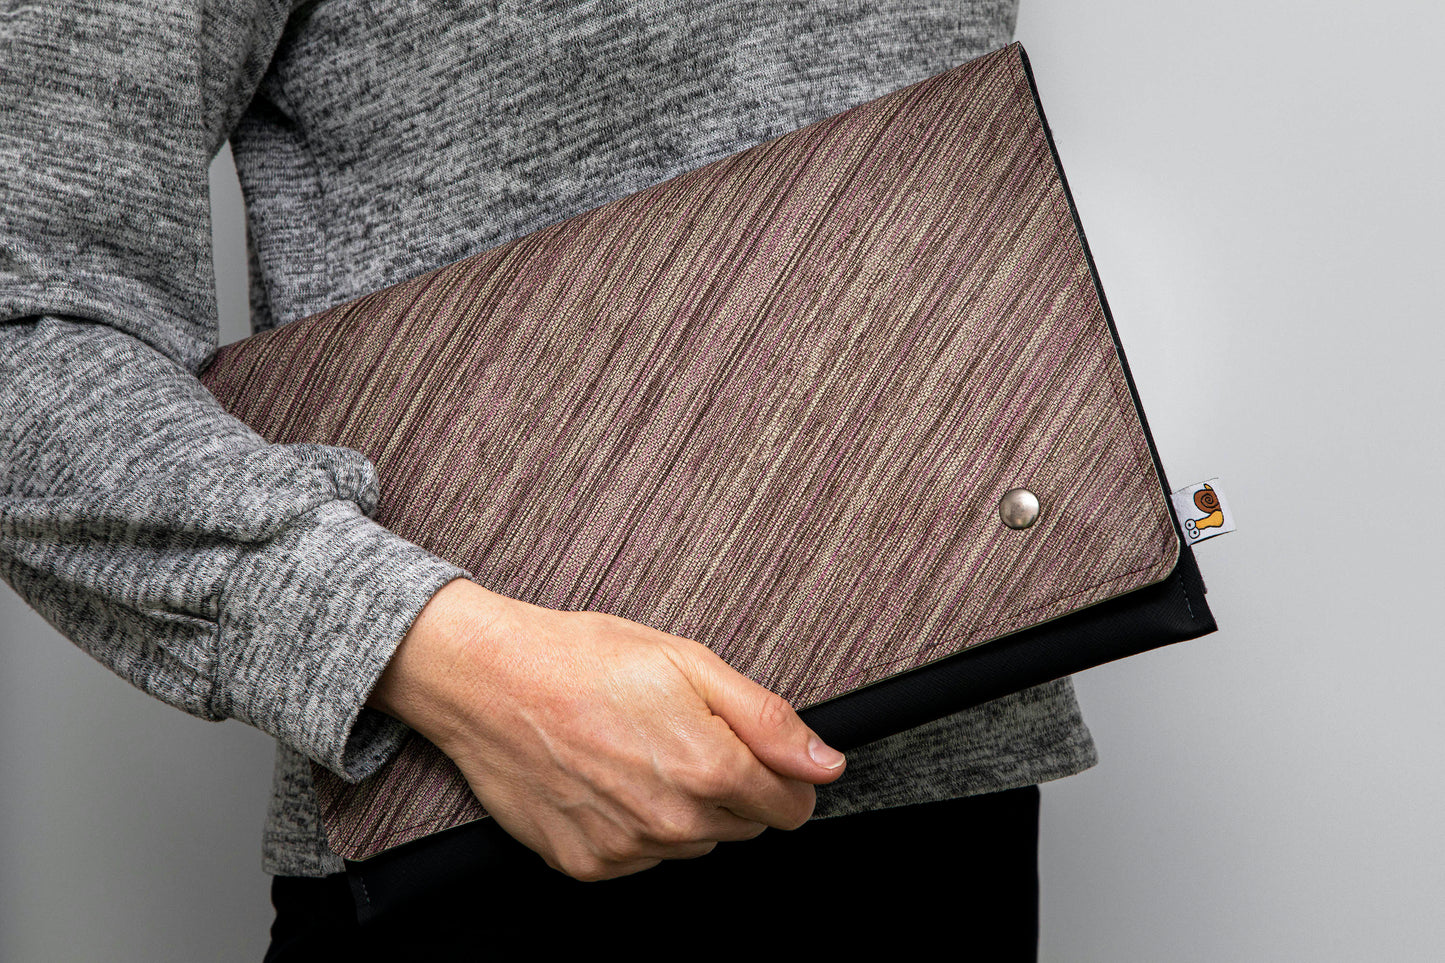 Handmade MacBook Bag - Available For All Models